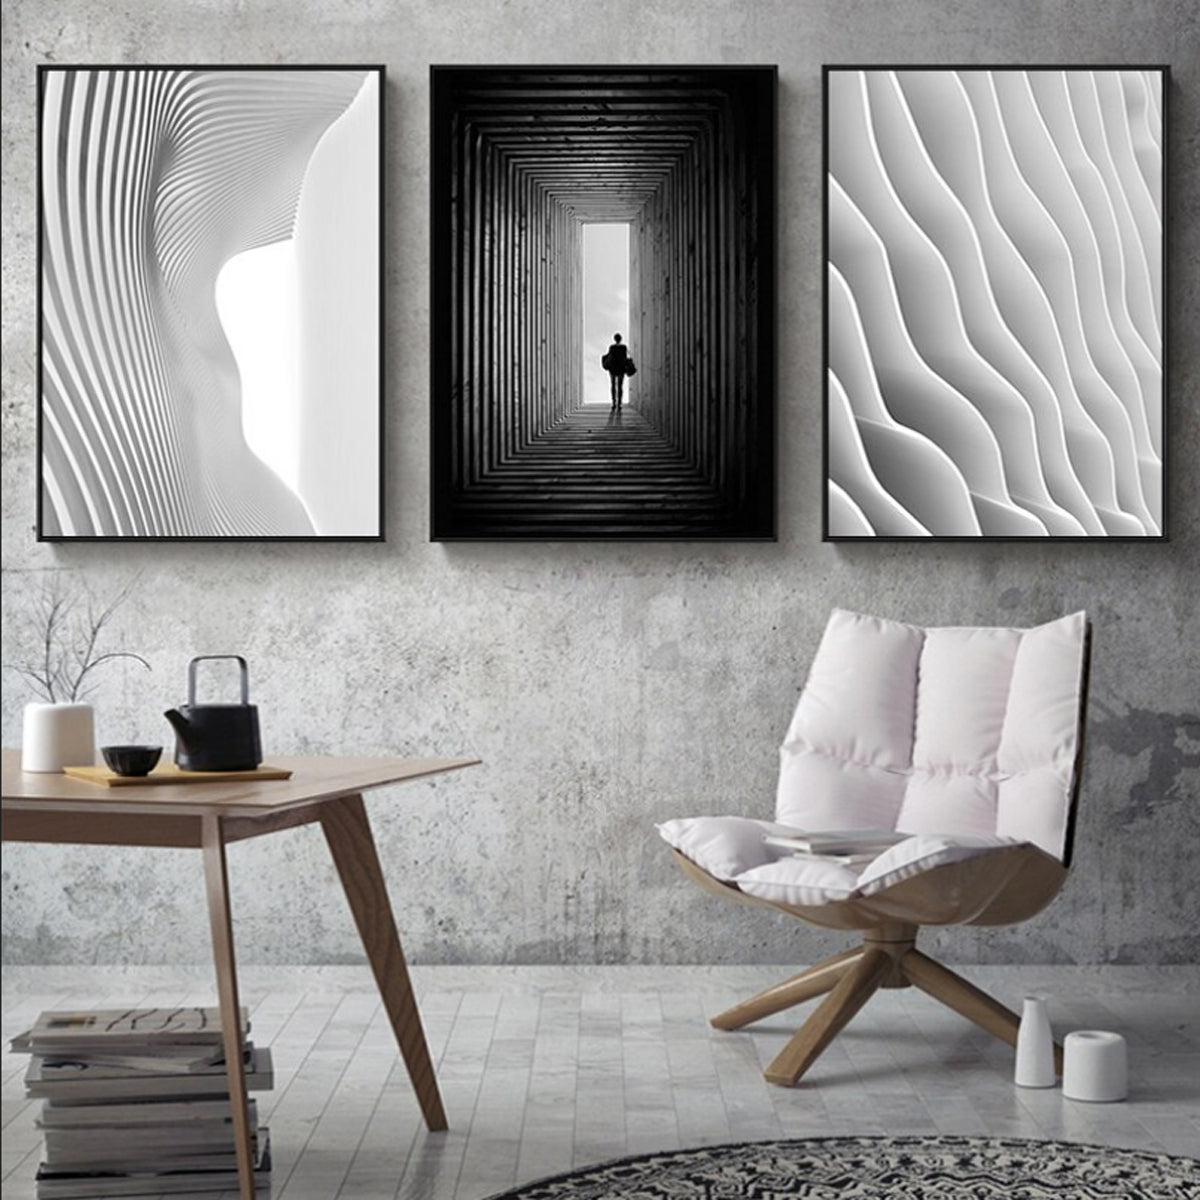 TPFLiving Canvas Picture Shapes Nordic - Art Abstract in Art Traumpreisfabrik Bla Print –